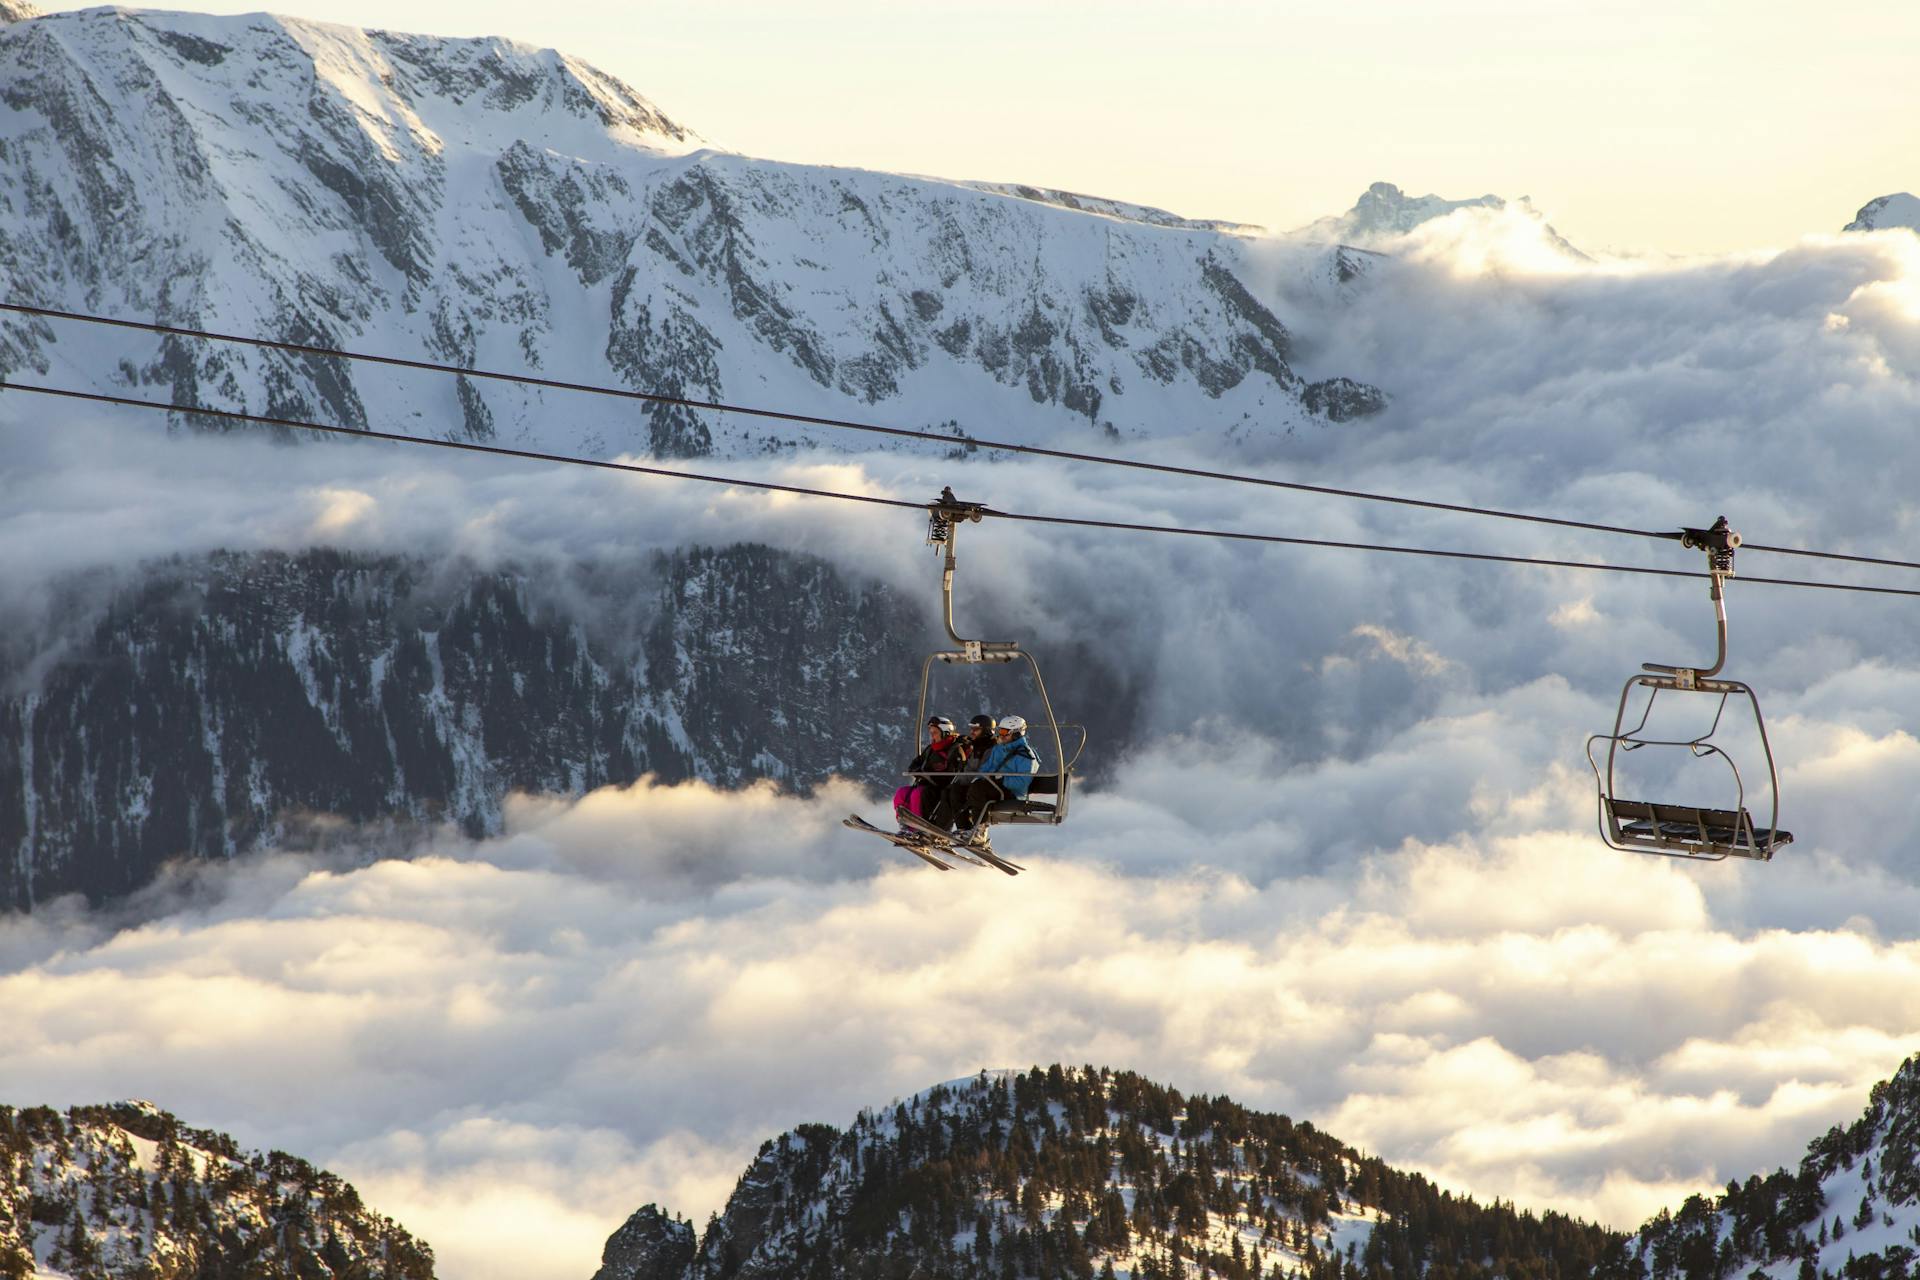 Chairlift transporting skiiers up mountain above clouds